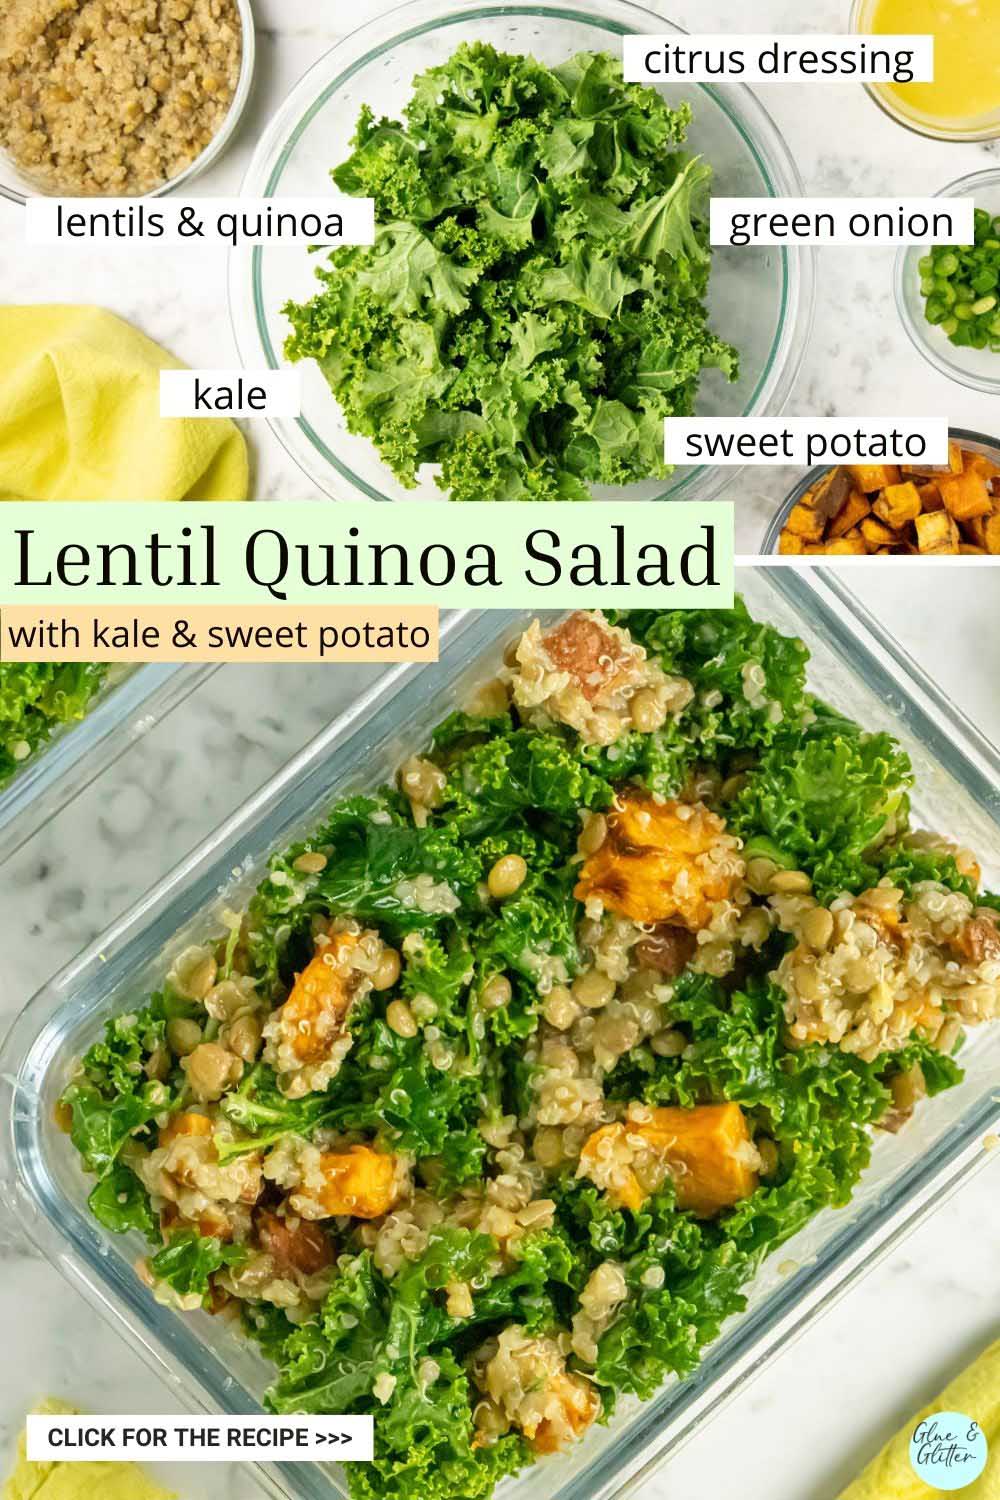 image collage showing the lentil quinoa salad ingredients with text labels and the assembled salad in a meal prep container